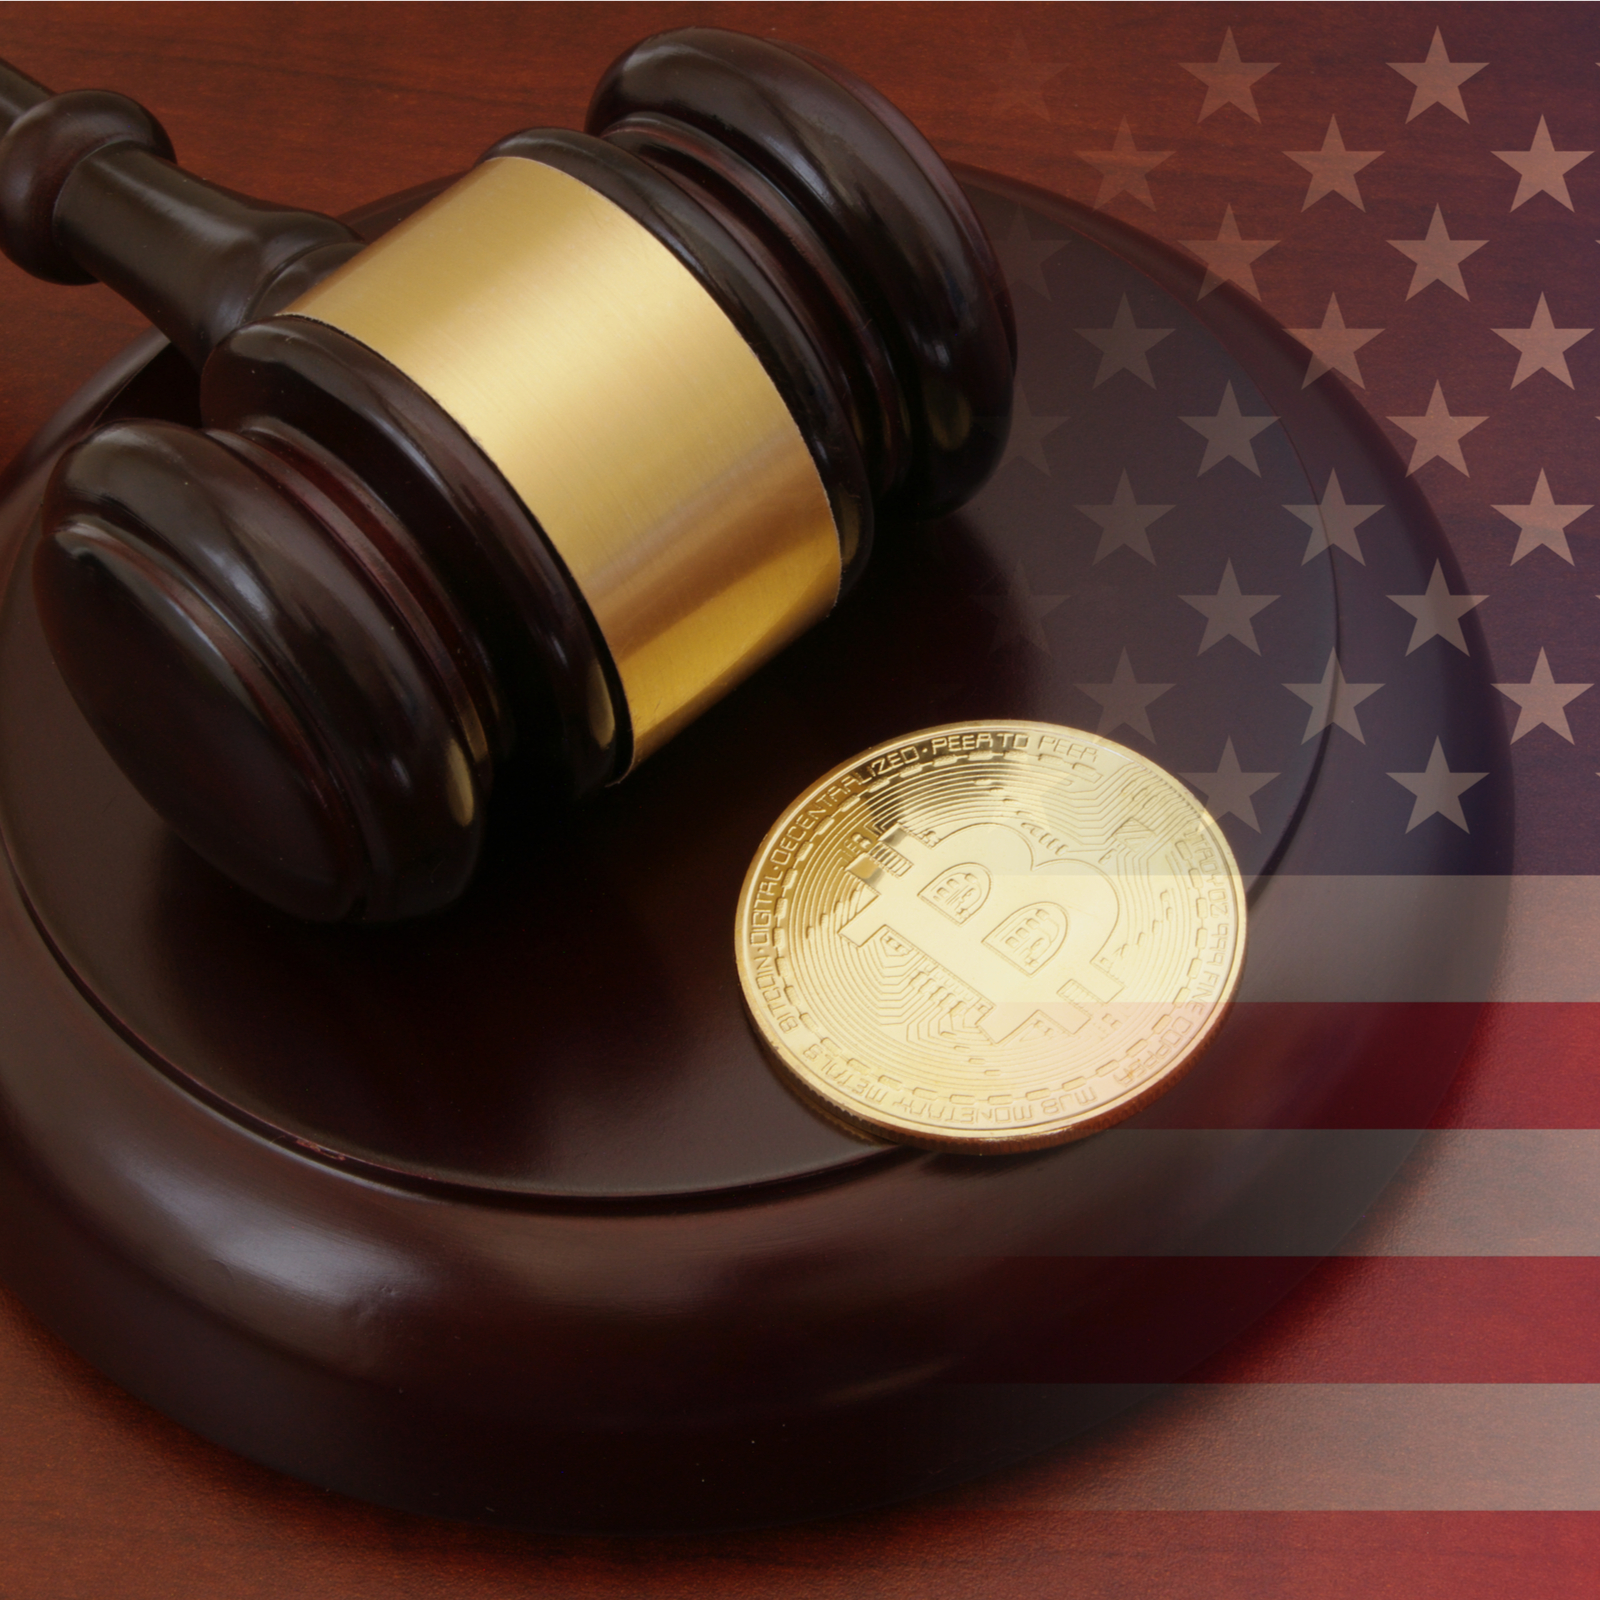 Bitcoin and Cryptocurrencies Are Commodities federal Court Rules